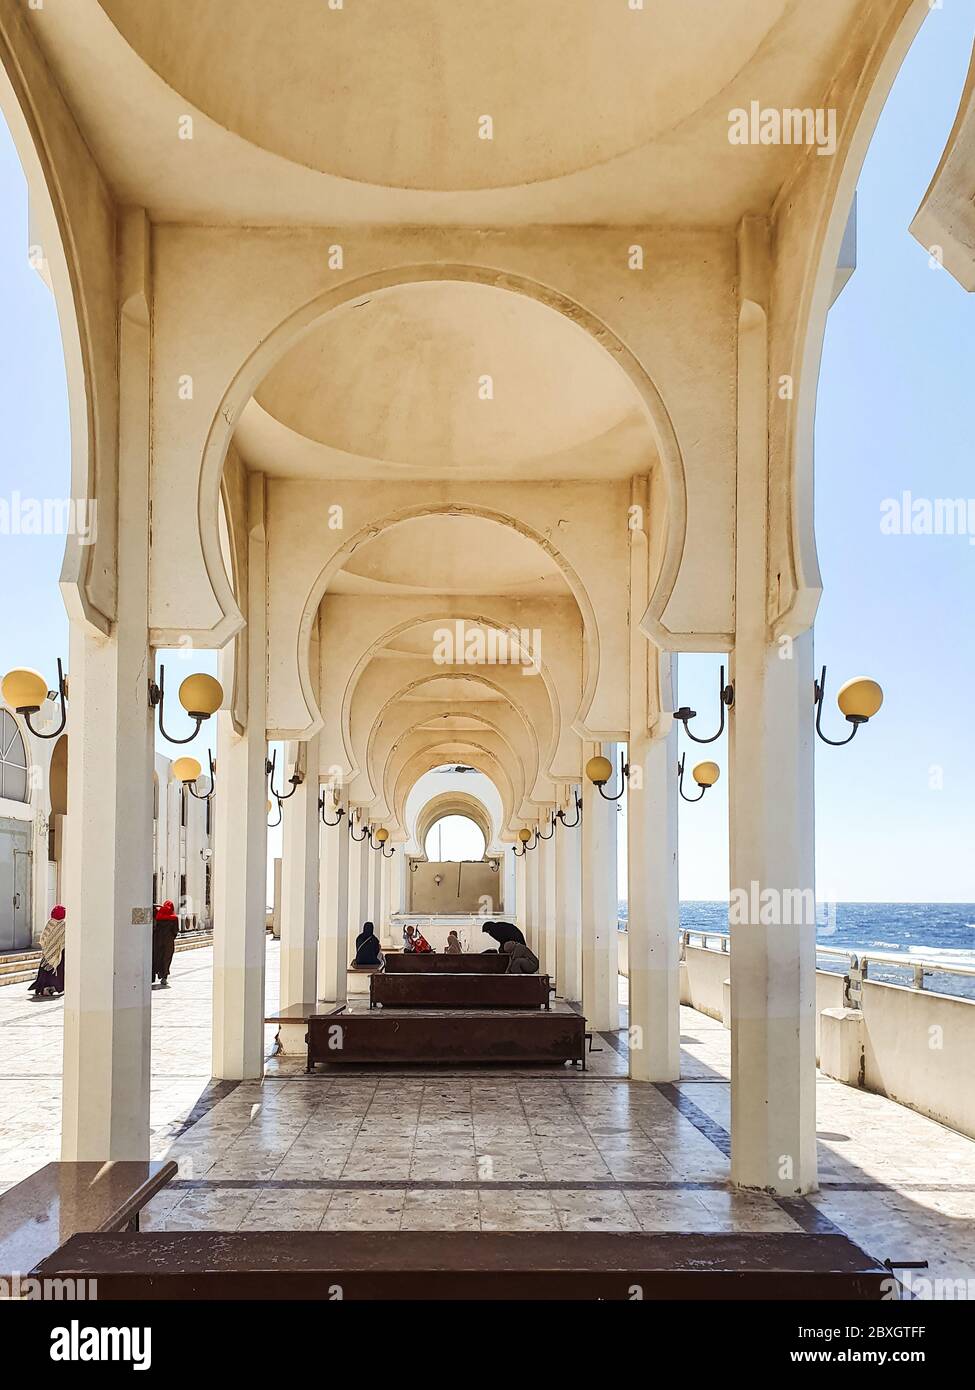 Jeddah / Saudi Arabia - January 20, 2020: Beautiful Mosque near the sea with arches and columns and believers praying Stock Photo